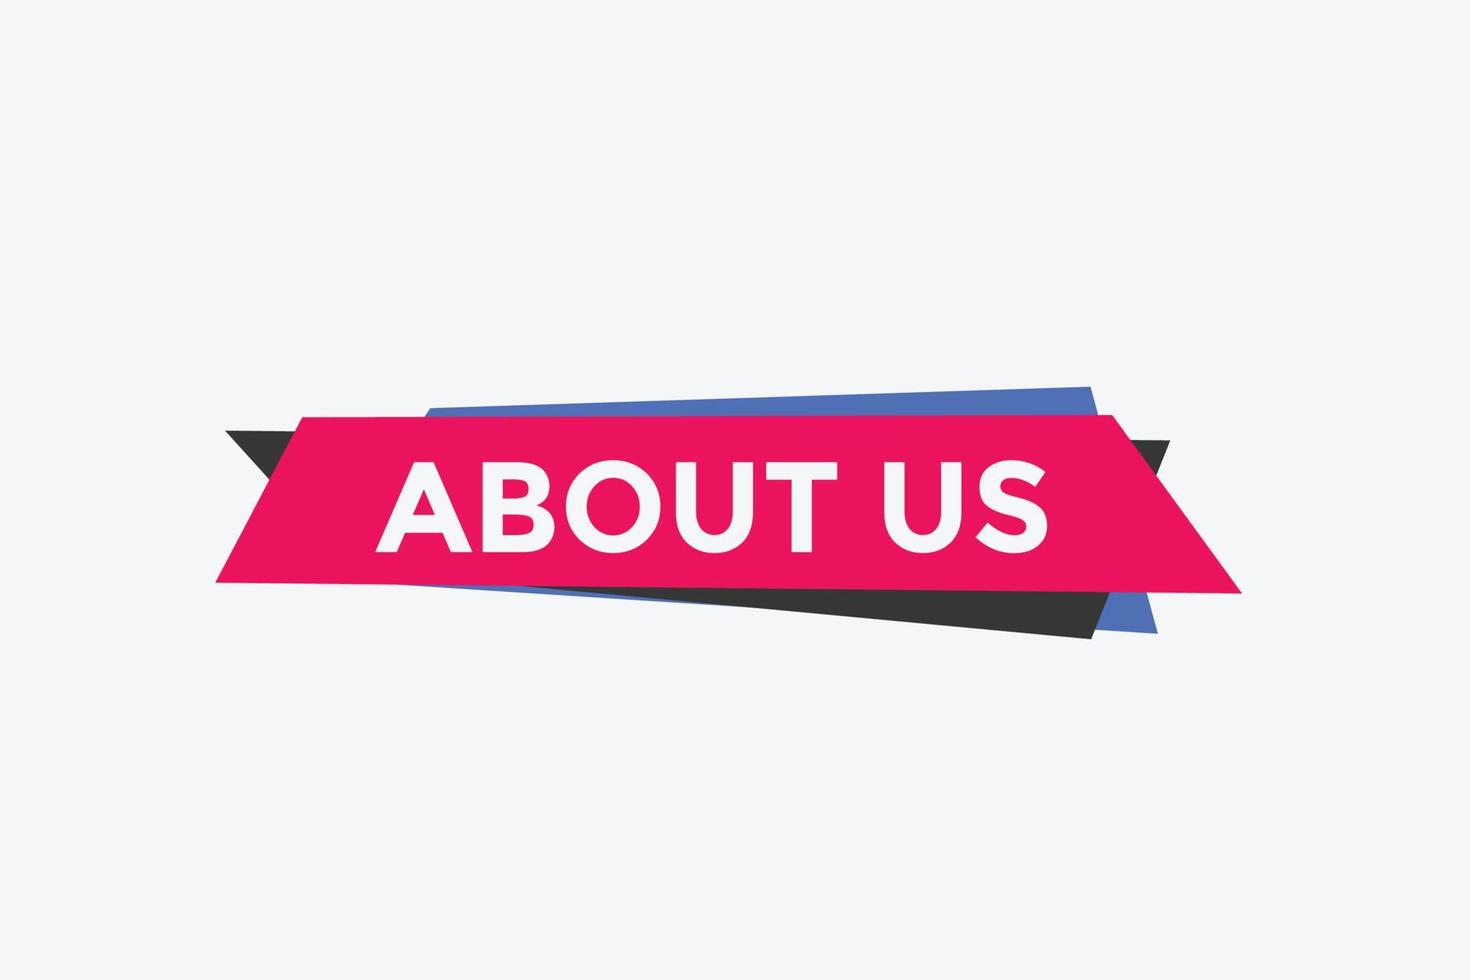 About us button. About us text template for website. About us icon flat style vector